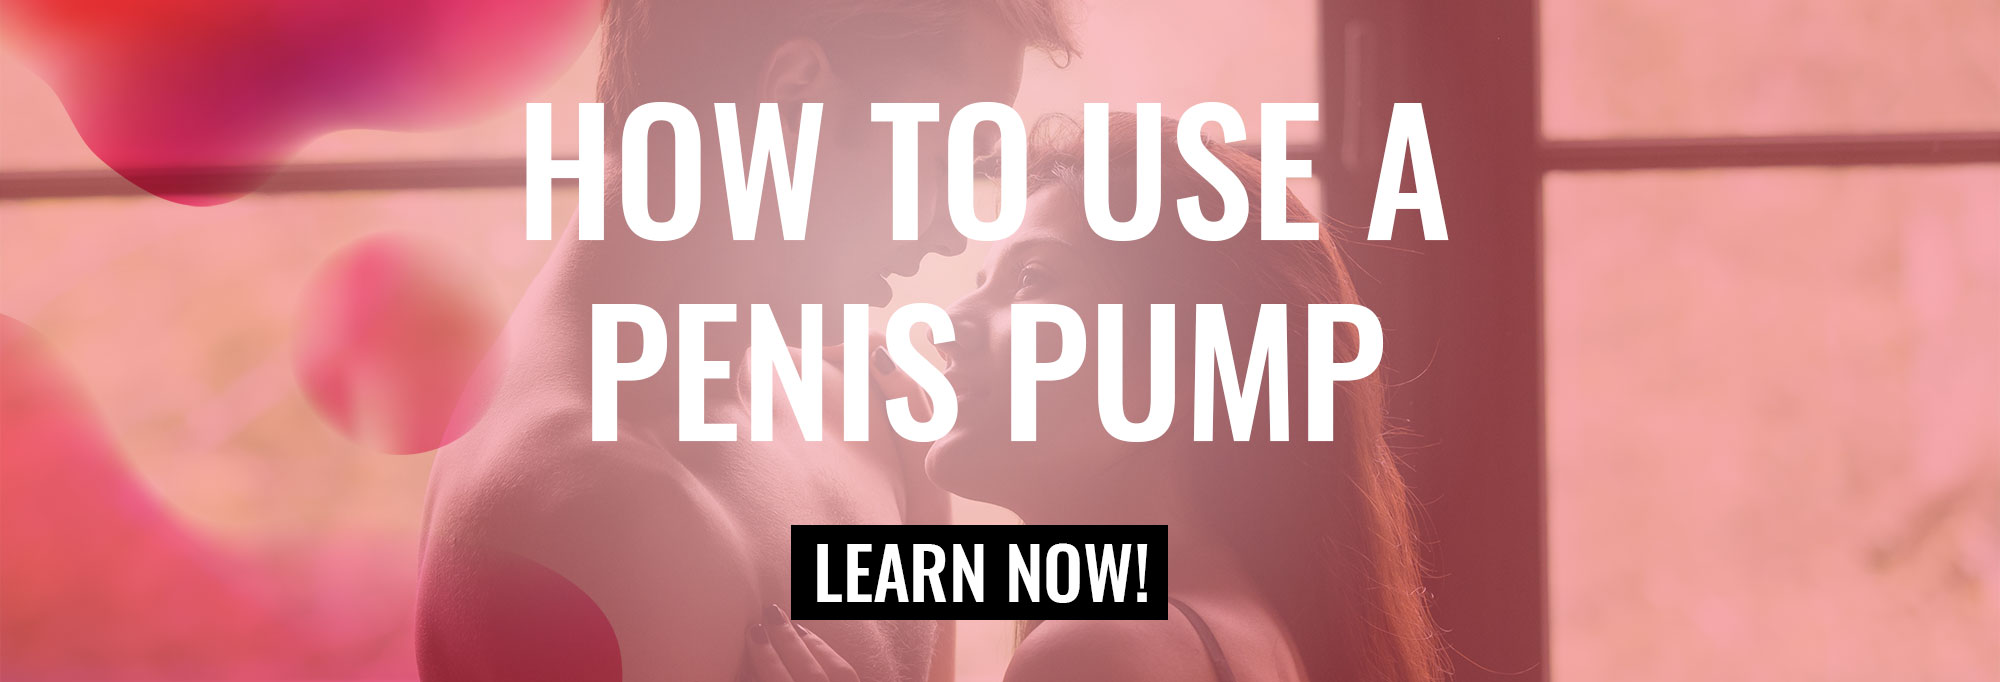 how to use a penis pump